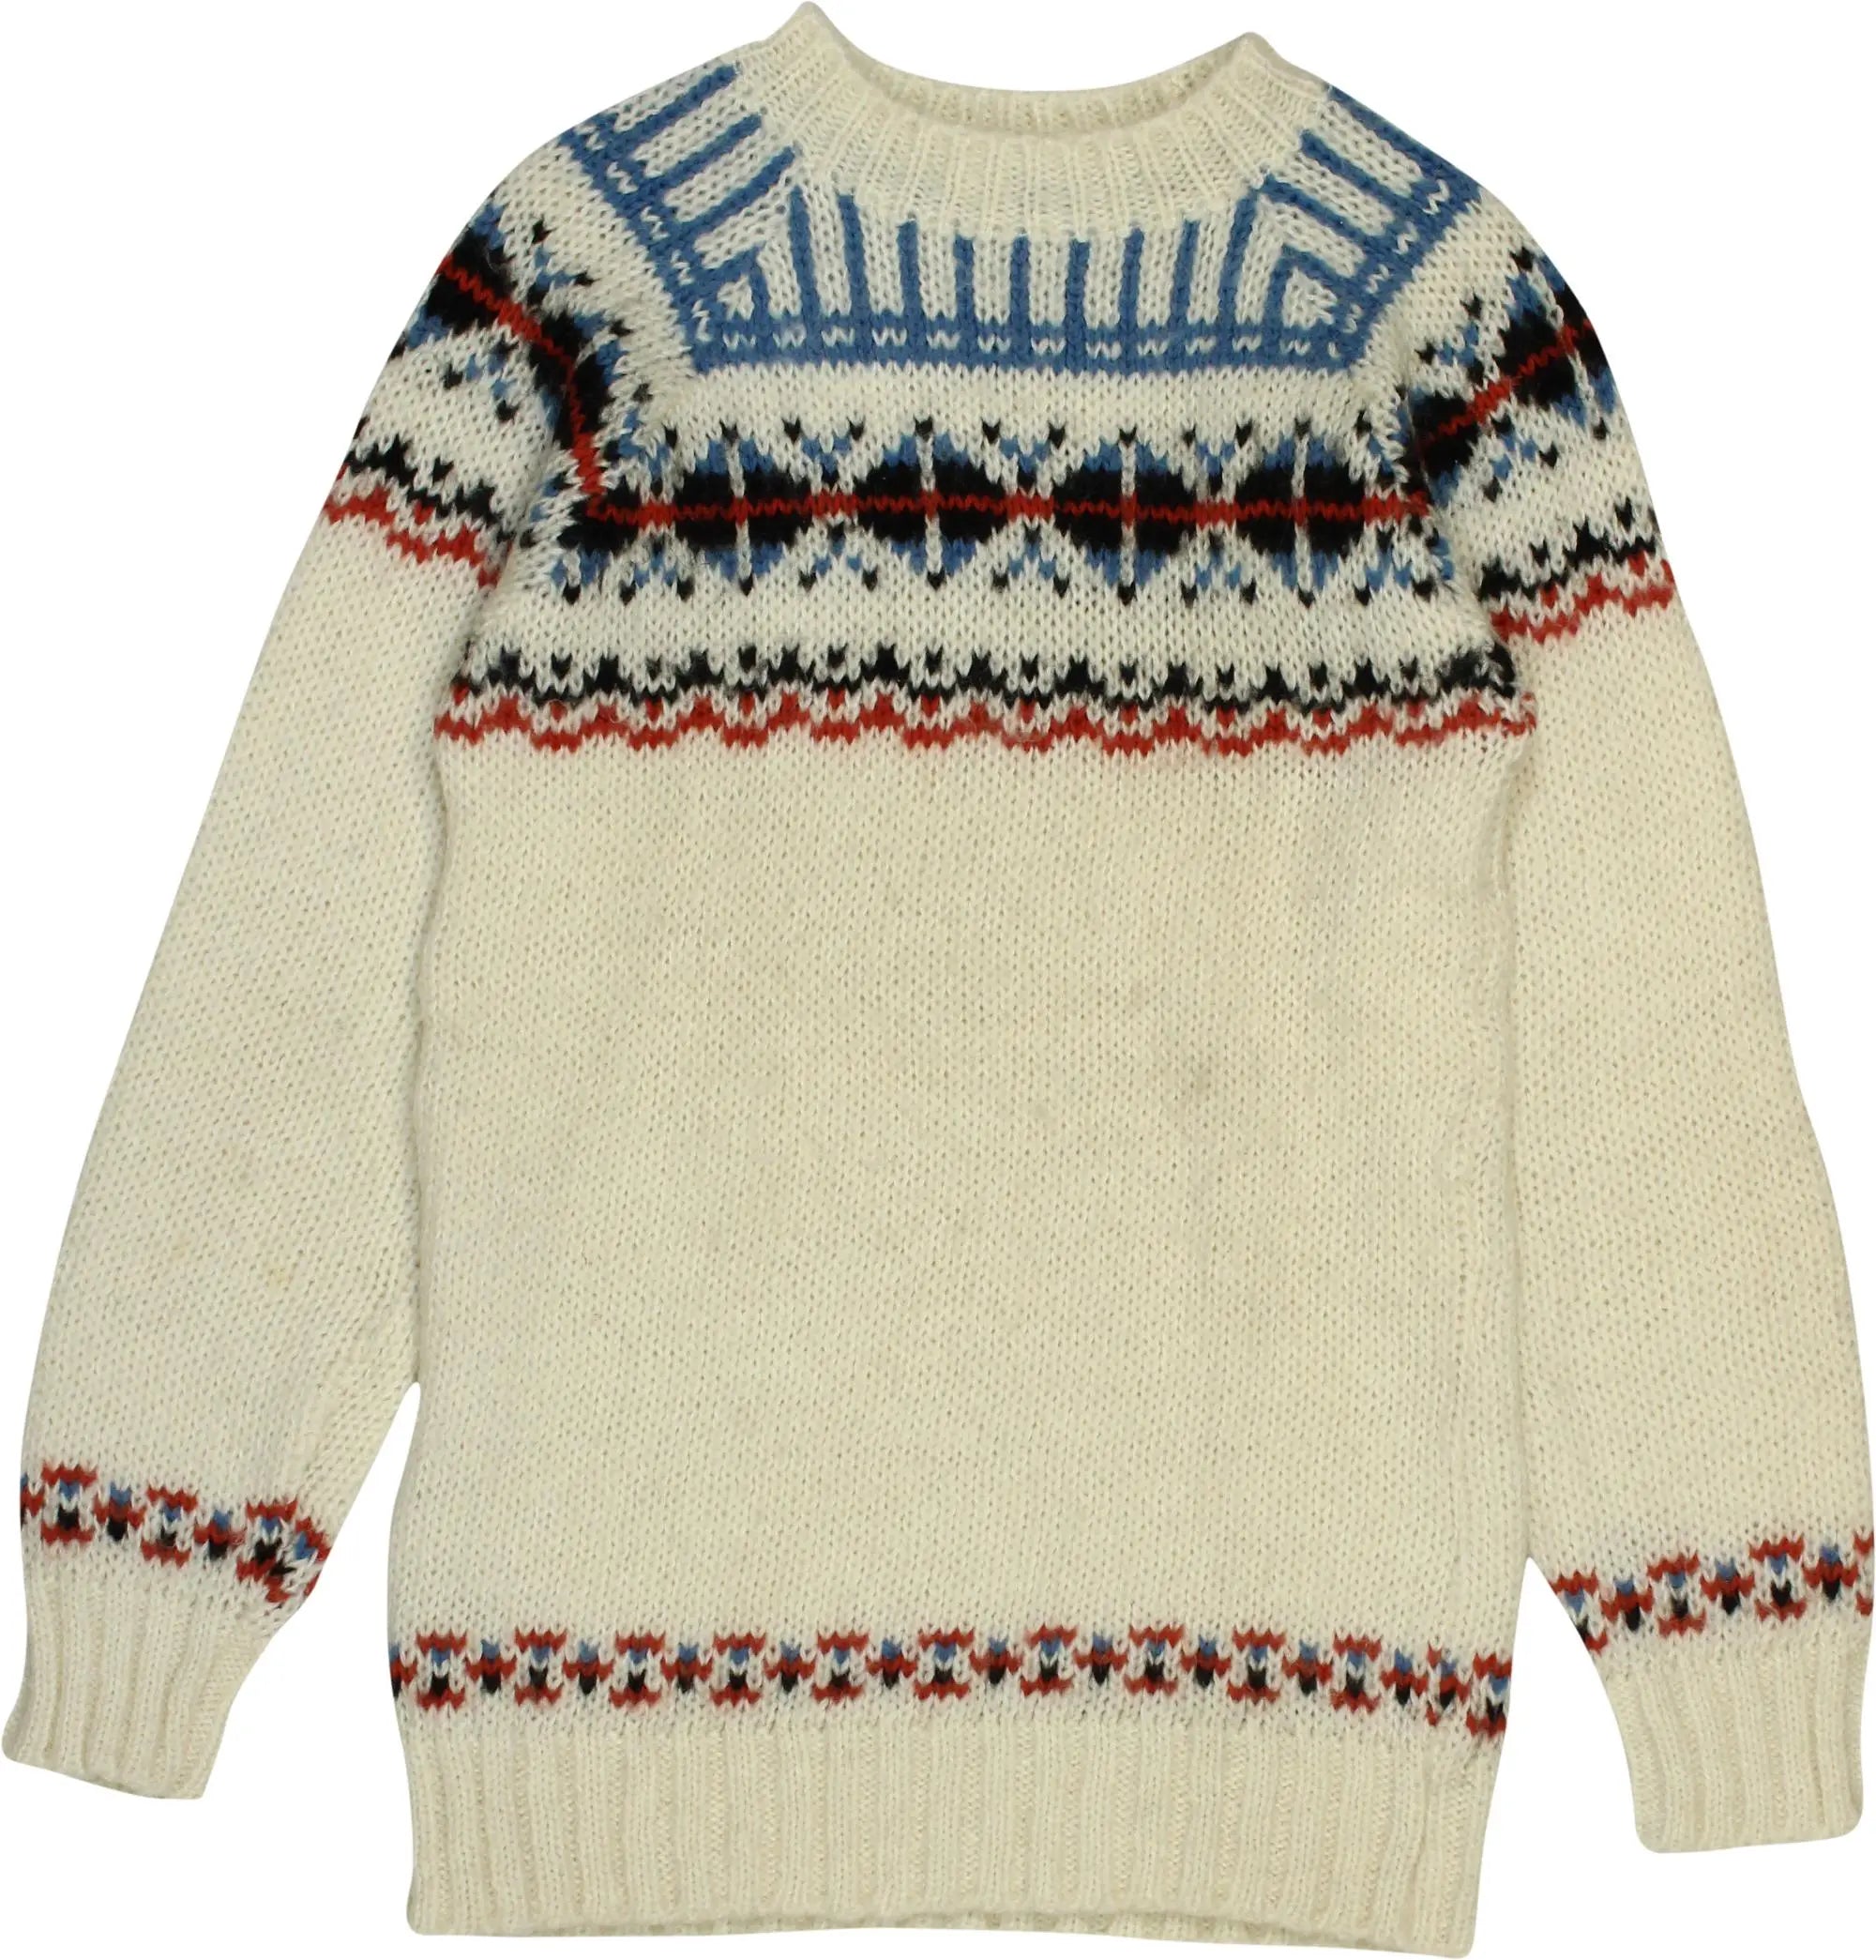 Unknown - Cream Knitted Jumper- ThriftTale.com - Vintage and second handclothing